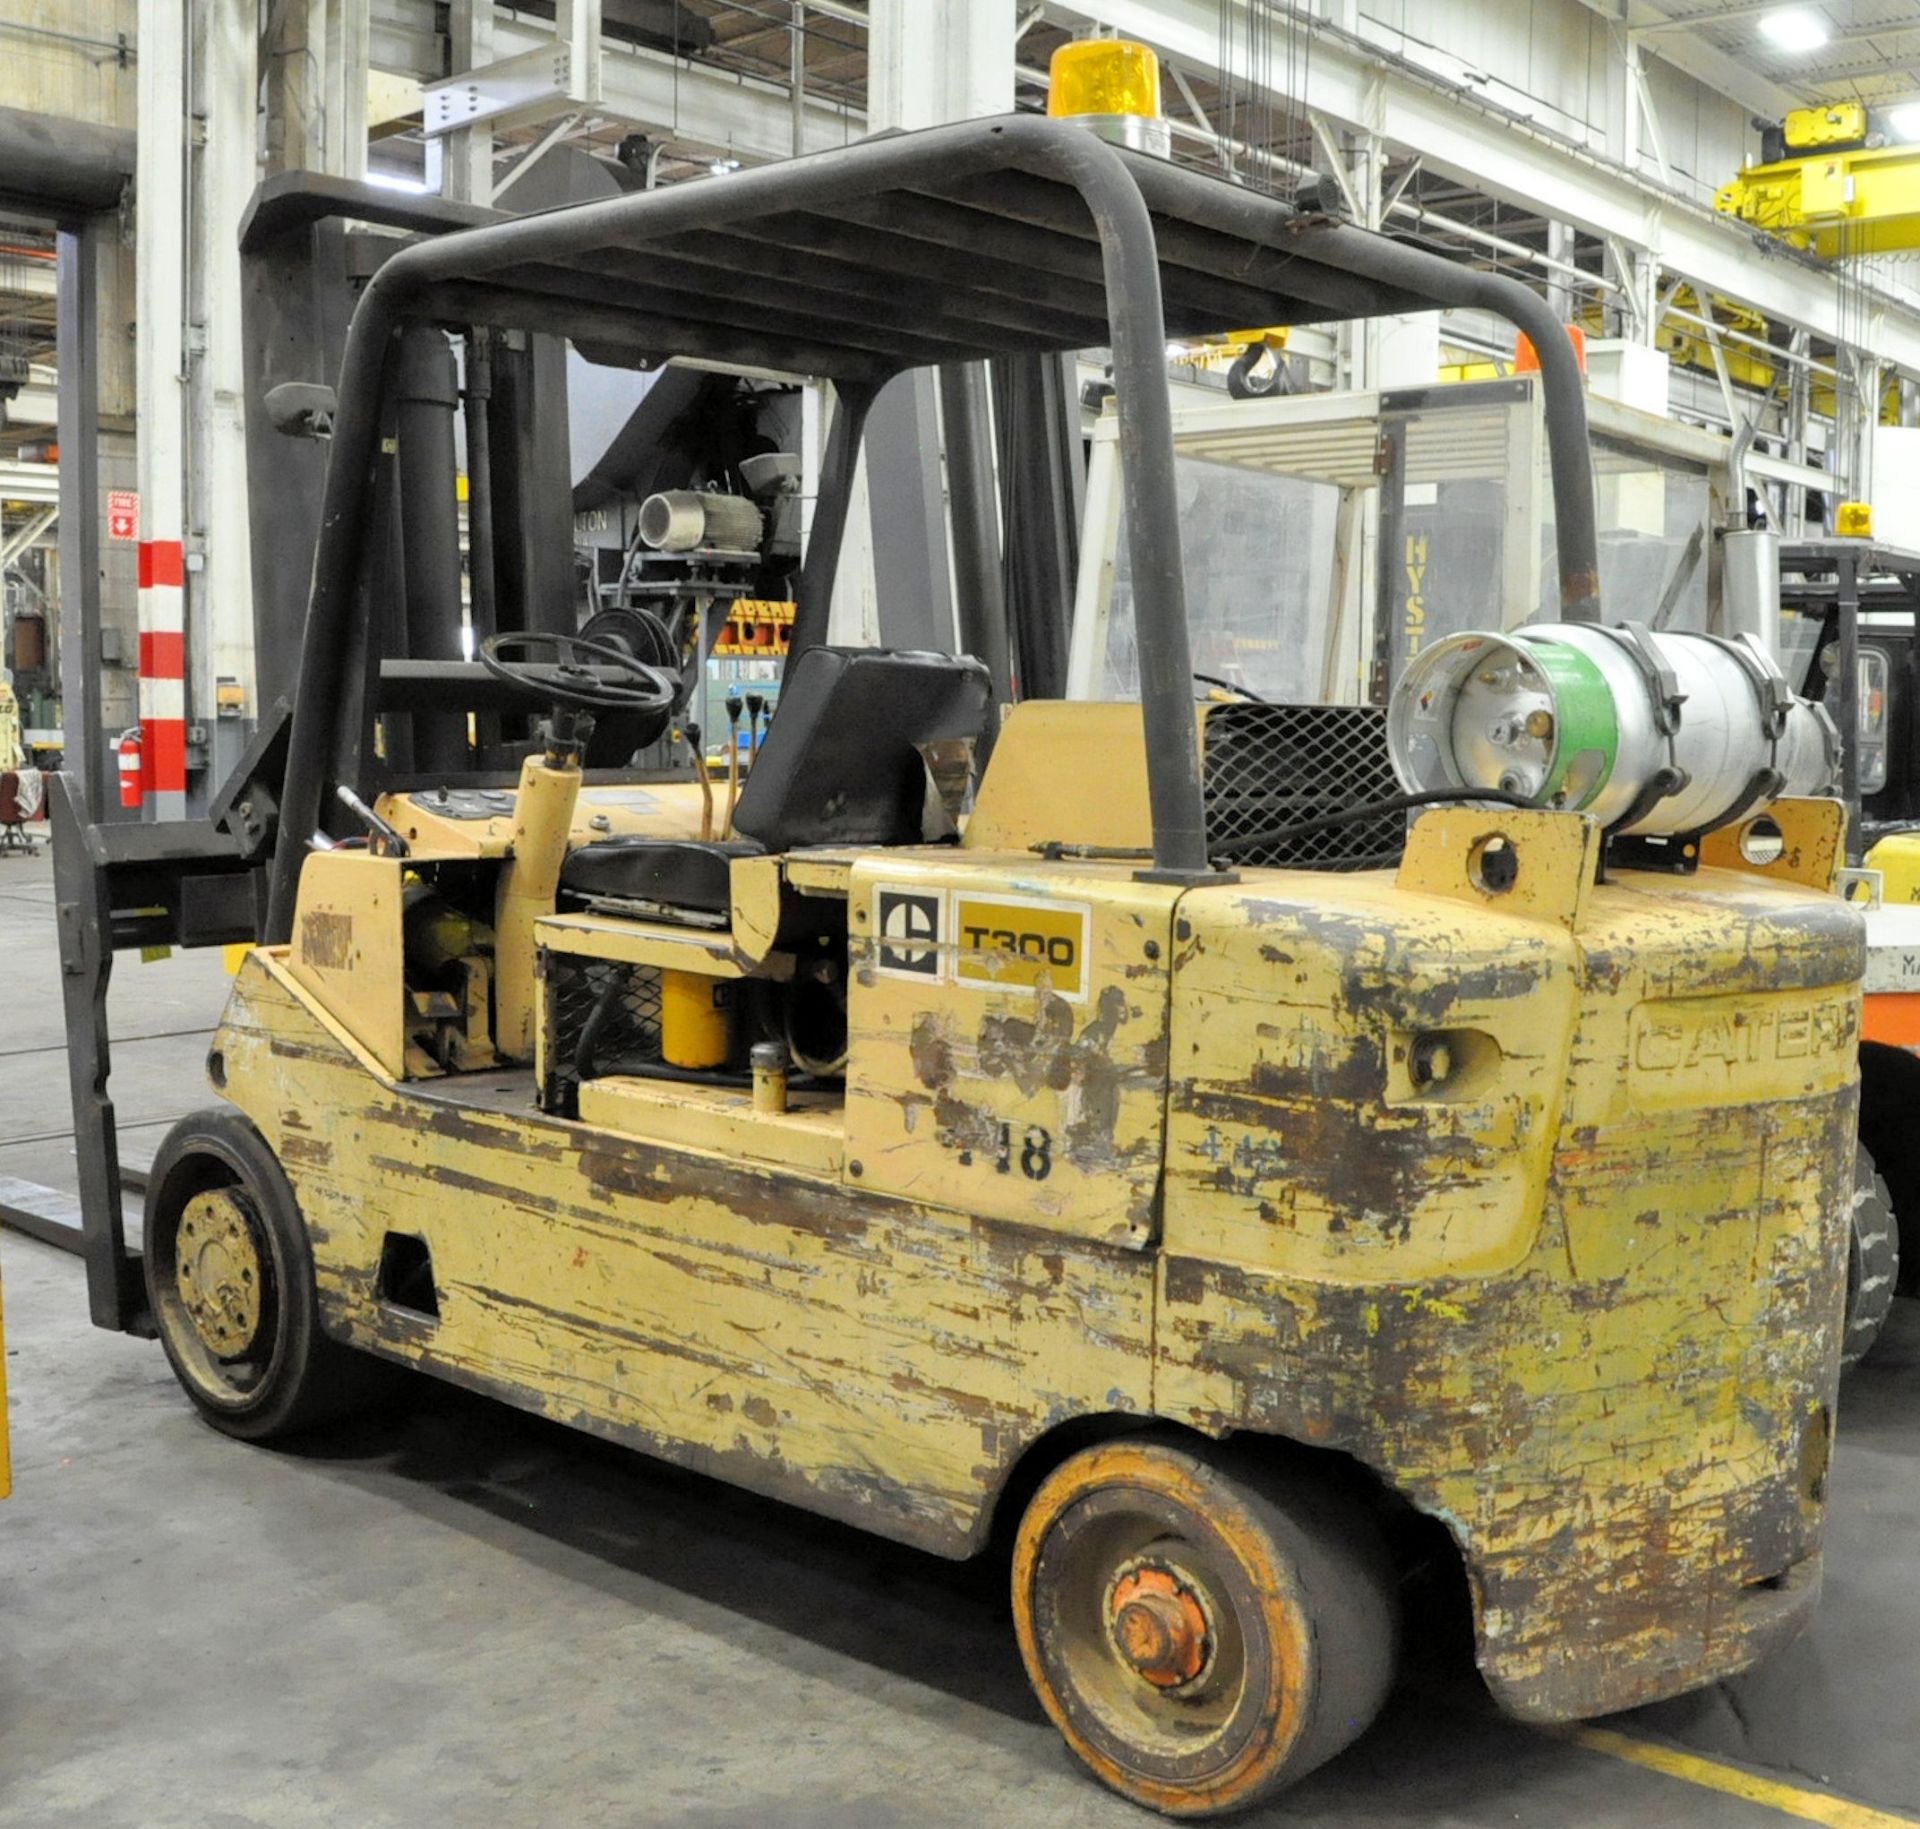 Caterpillar Model T-300, 30,000-Lbs. Capacity LP Gas Forklift Truck, S/n 71L00741, 159" Lift, Side - Image 4 of 7